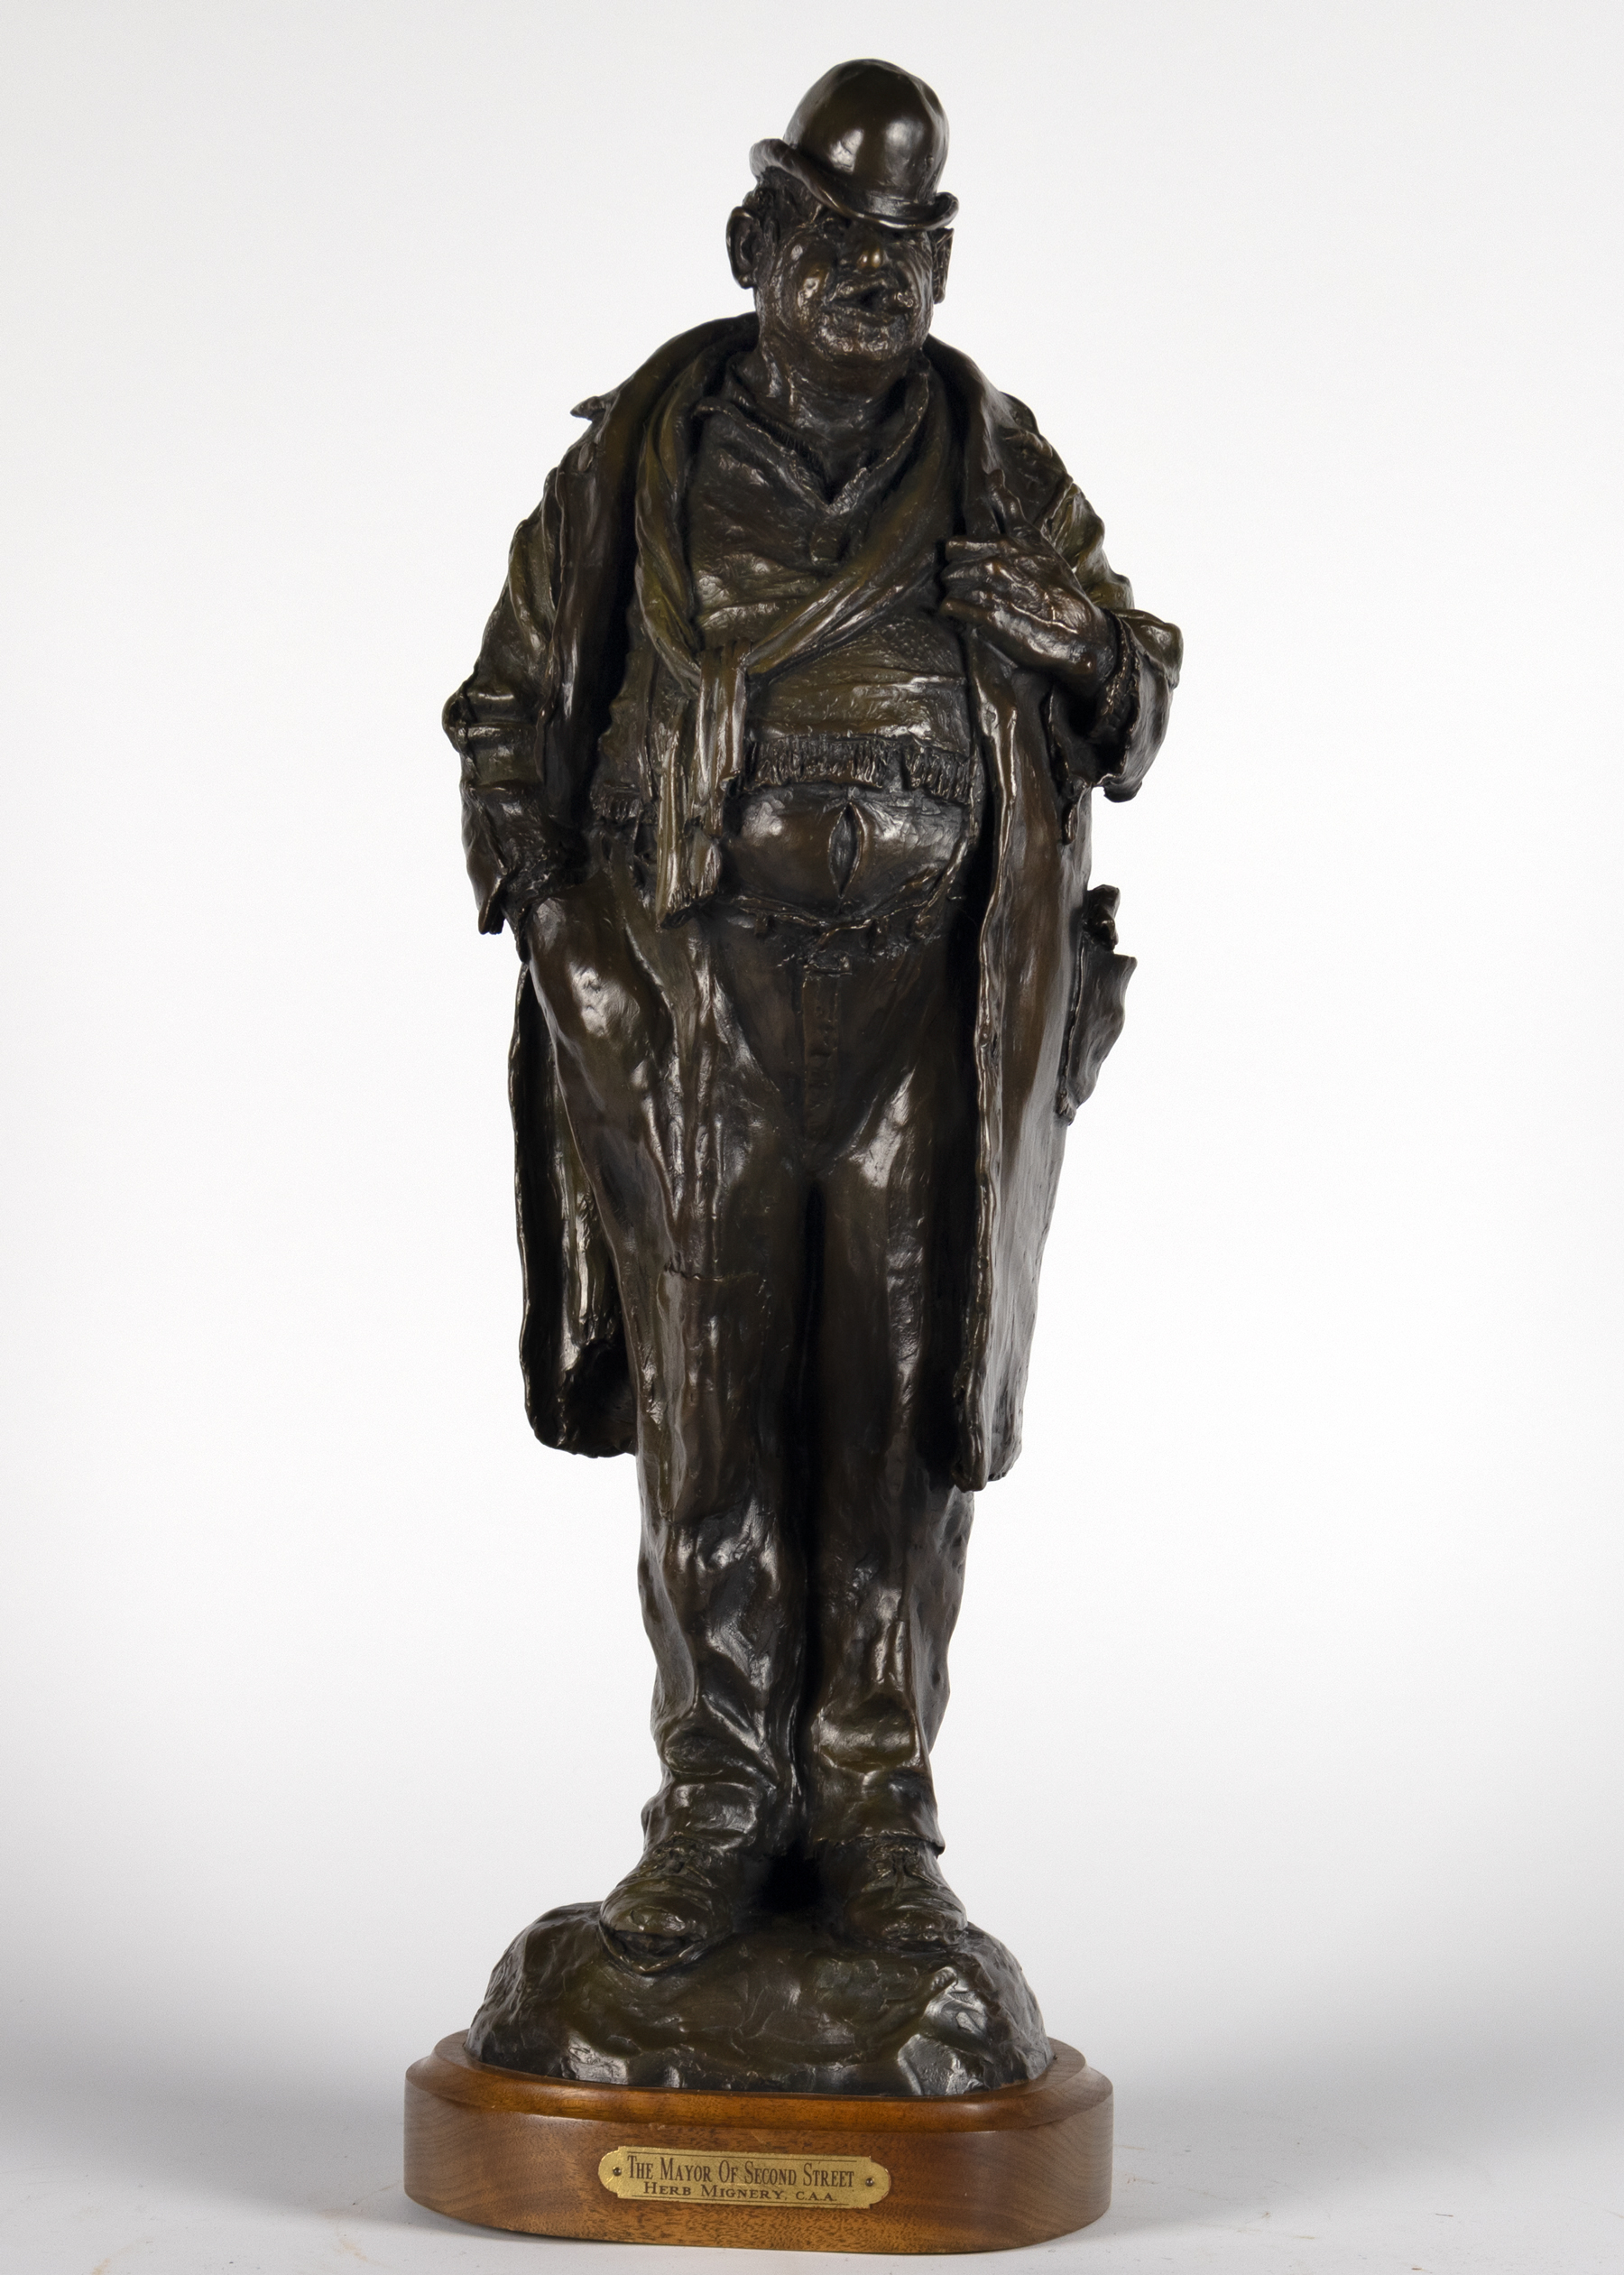 Herb Mignery (1937- ) The Mayor of Second Street, 1992 bronze, 5/20 24 5/8 x 9 5/8 x 7 7/8 26 1/4 x 9 5/8 x 7 7/8 (with base)